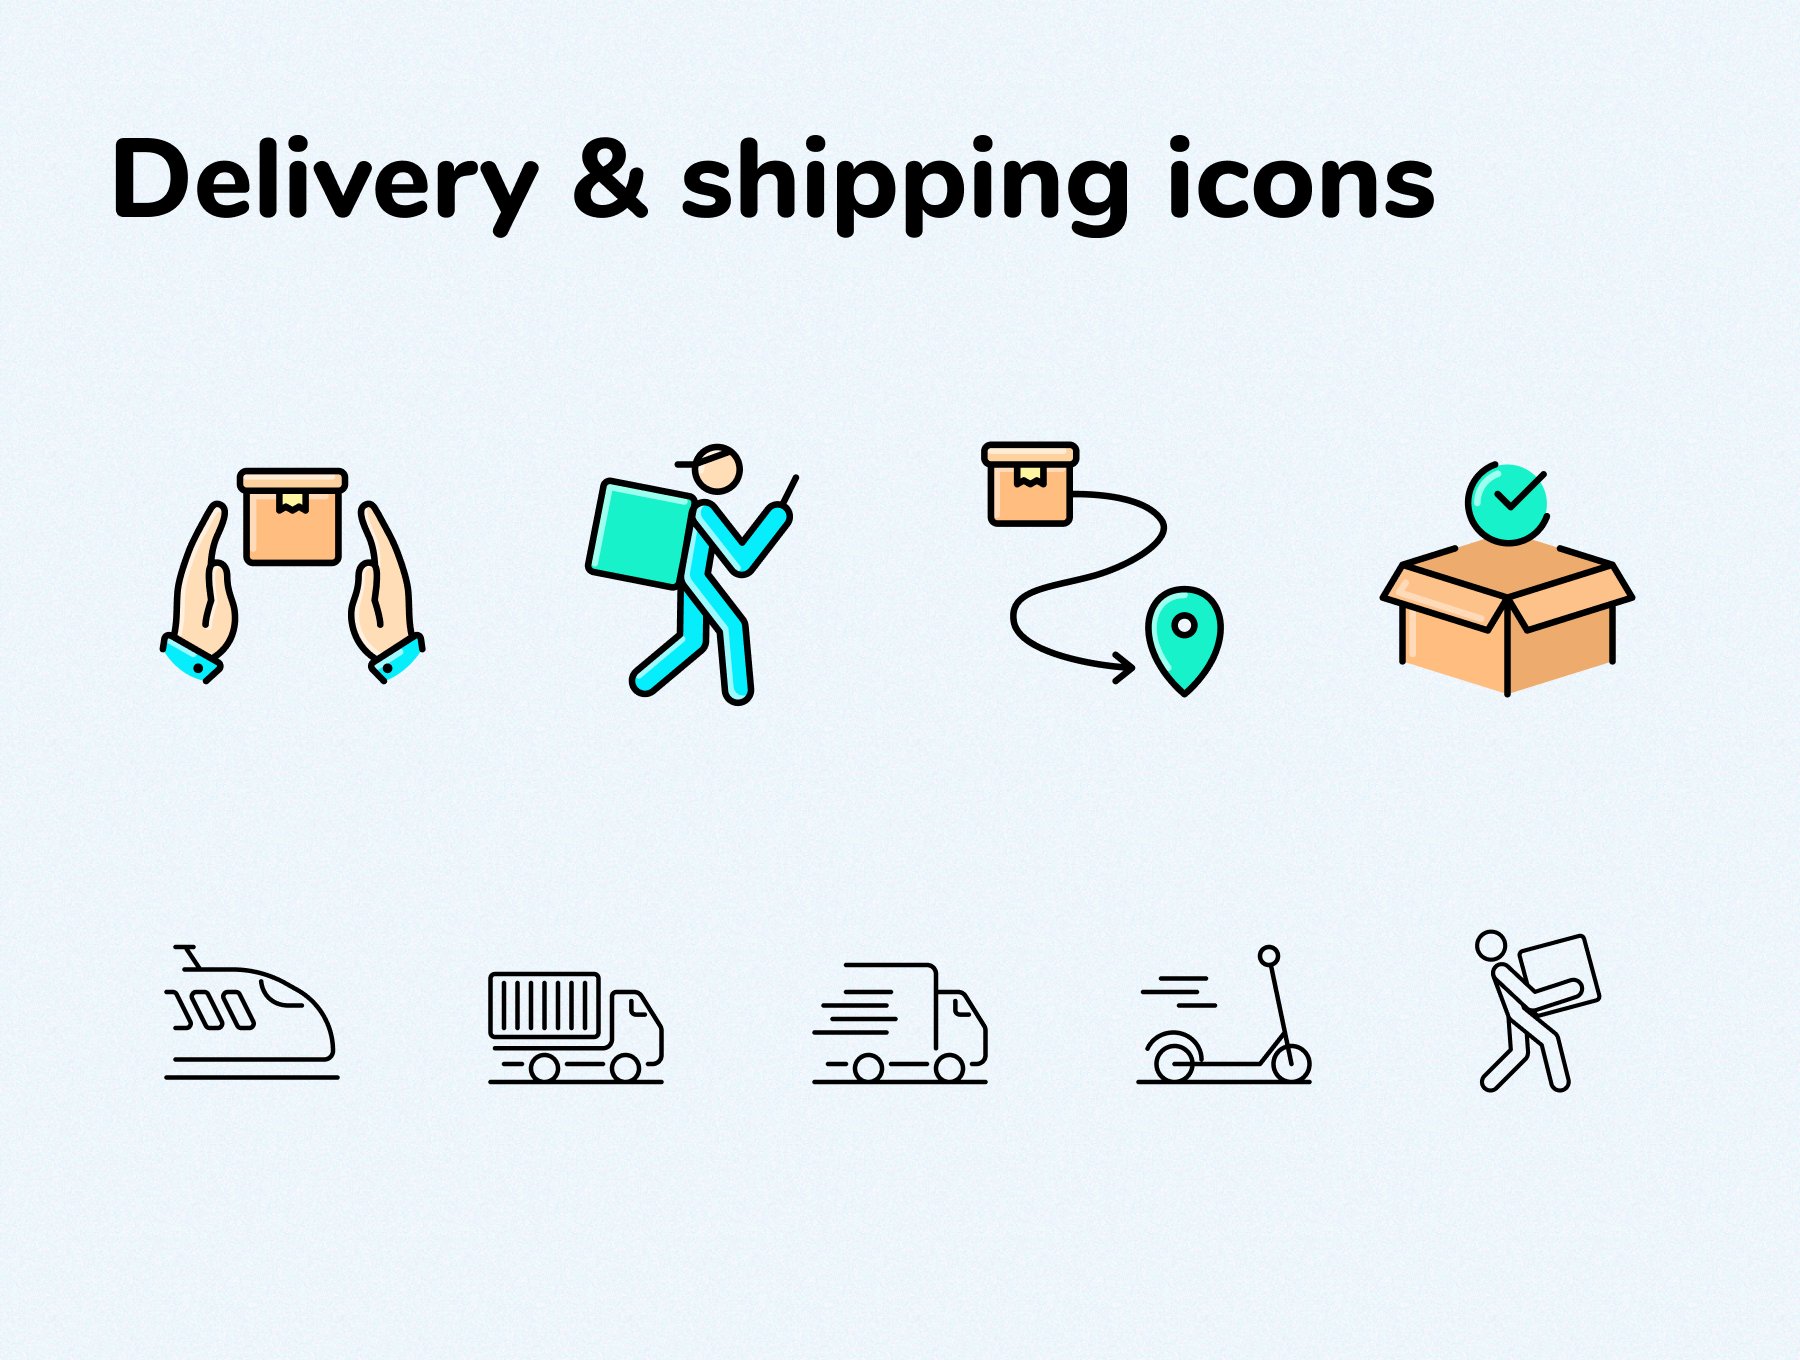 Fast Delivery & Shipping Icons Pack cover image.